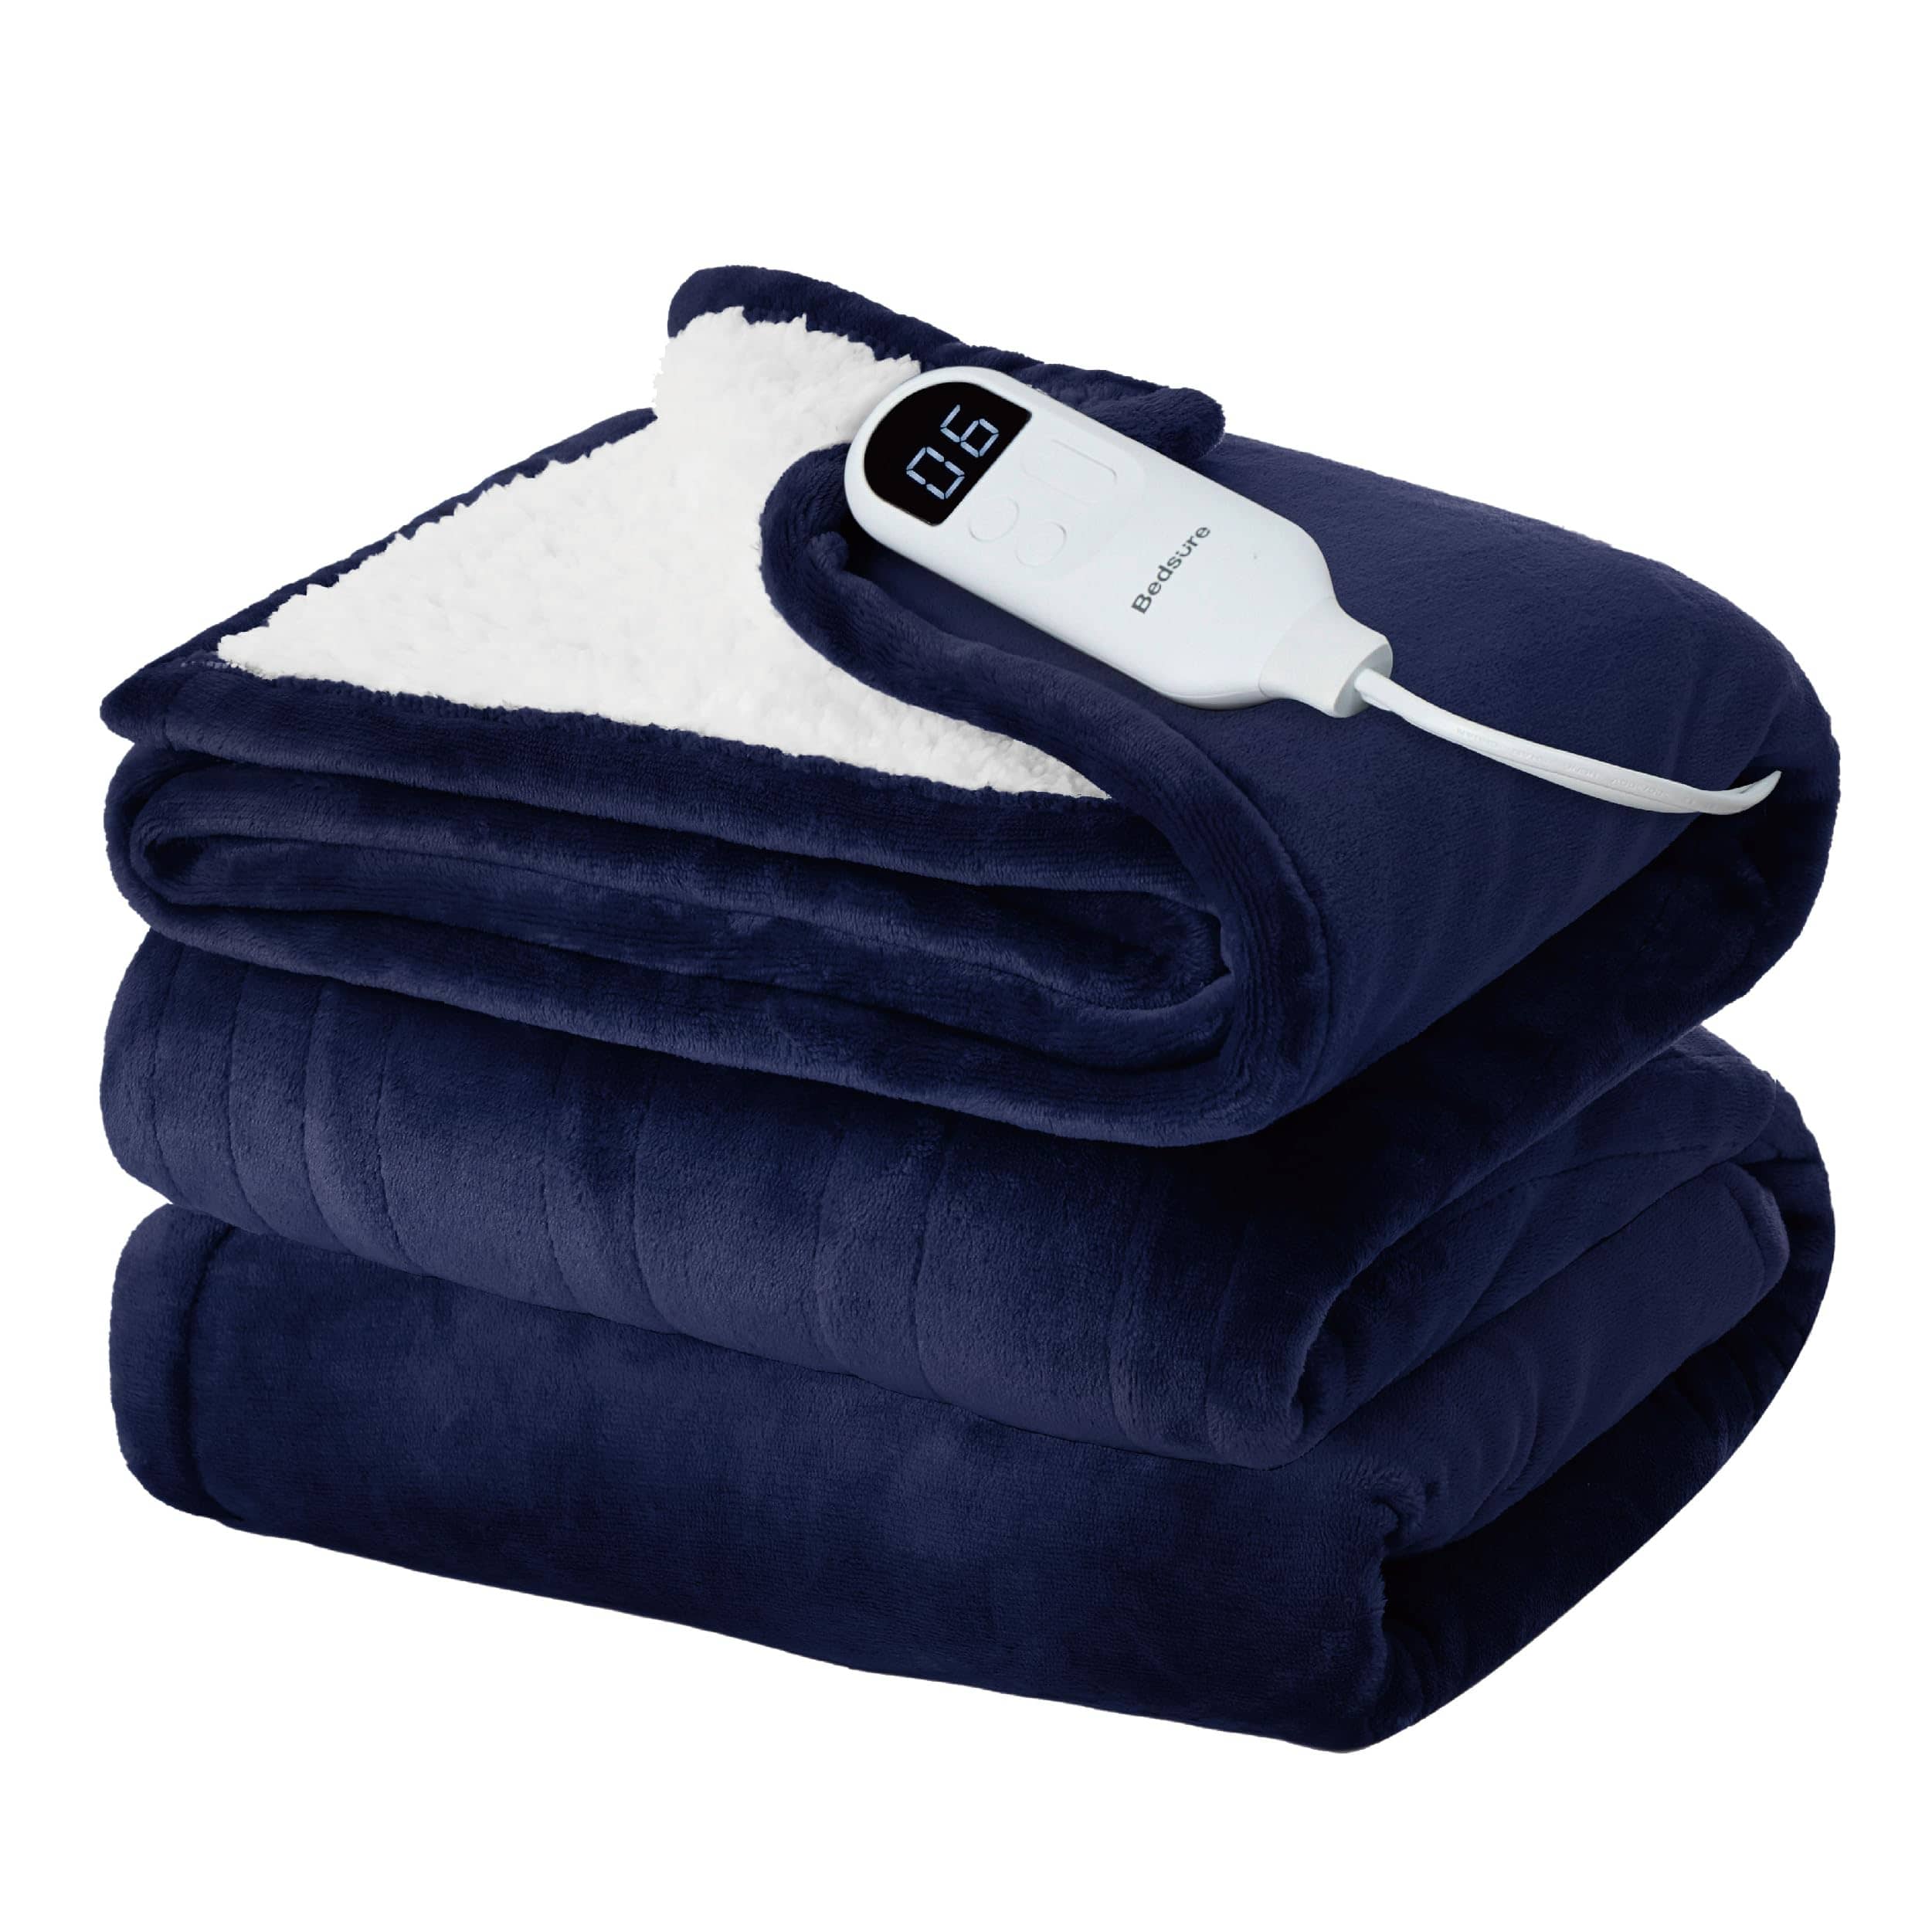 Bedsure Electric Heated Flannel Blanket